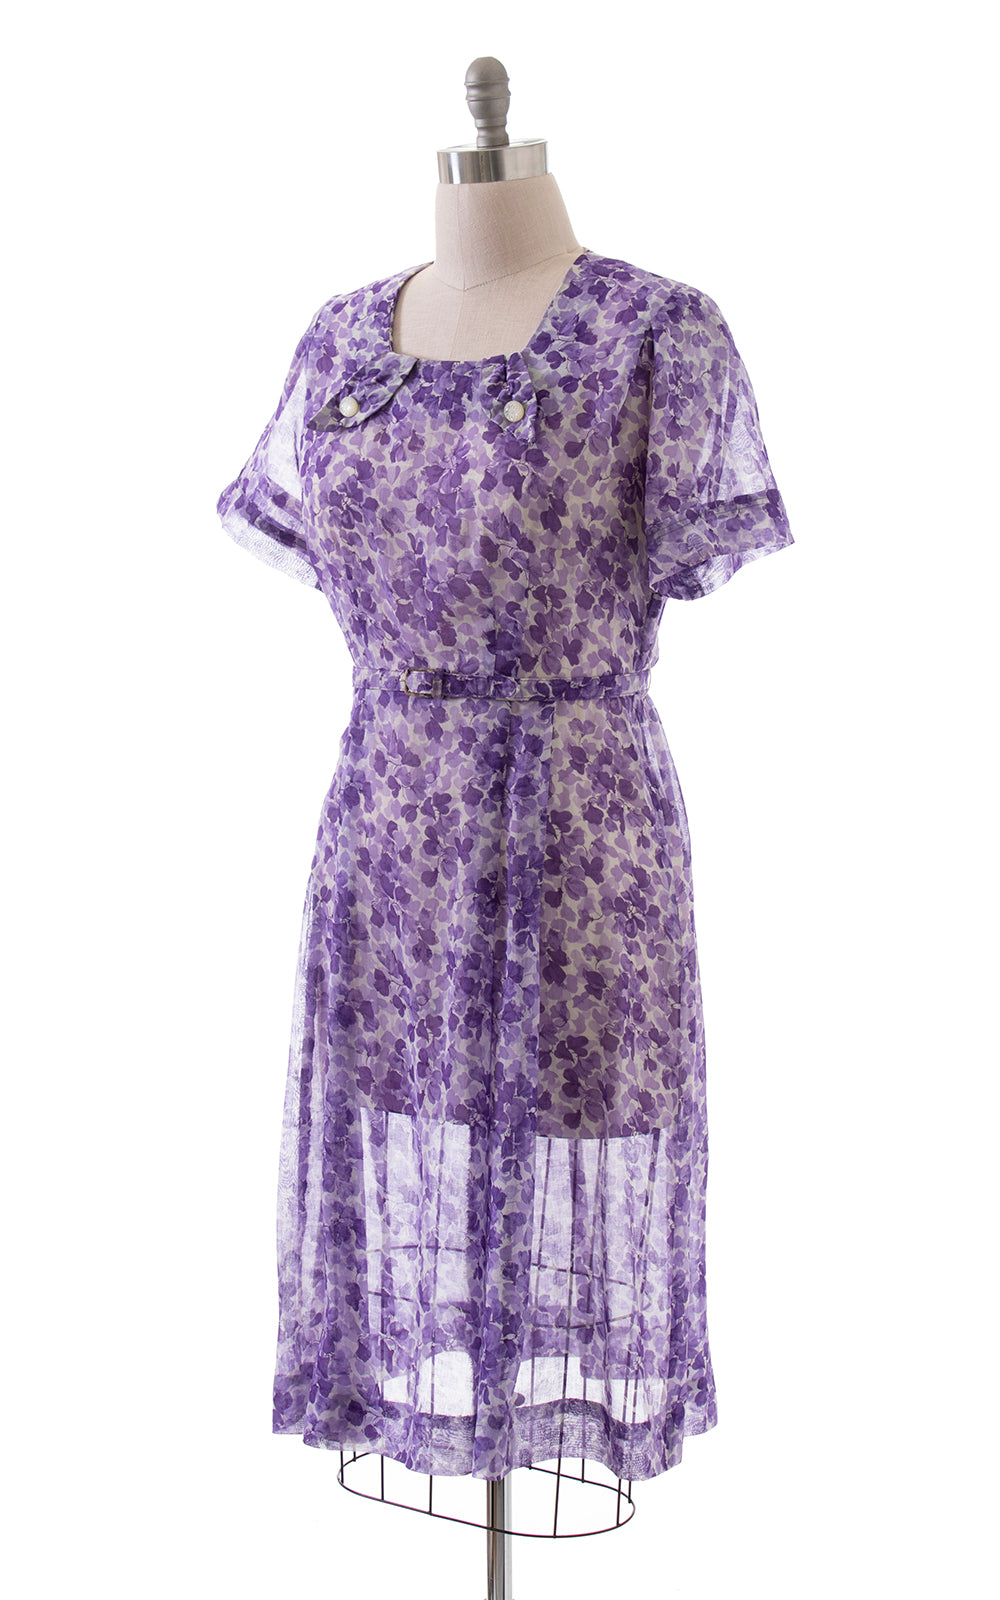 1940s Floral Sheer Cotton Voile Dress | large/x-large